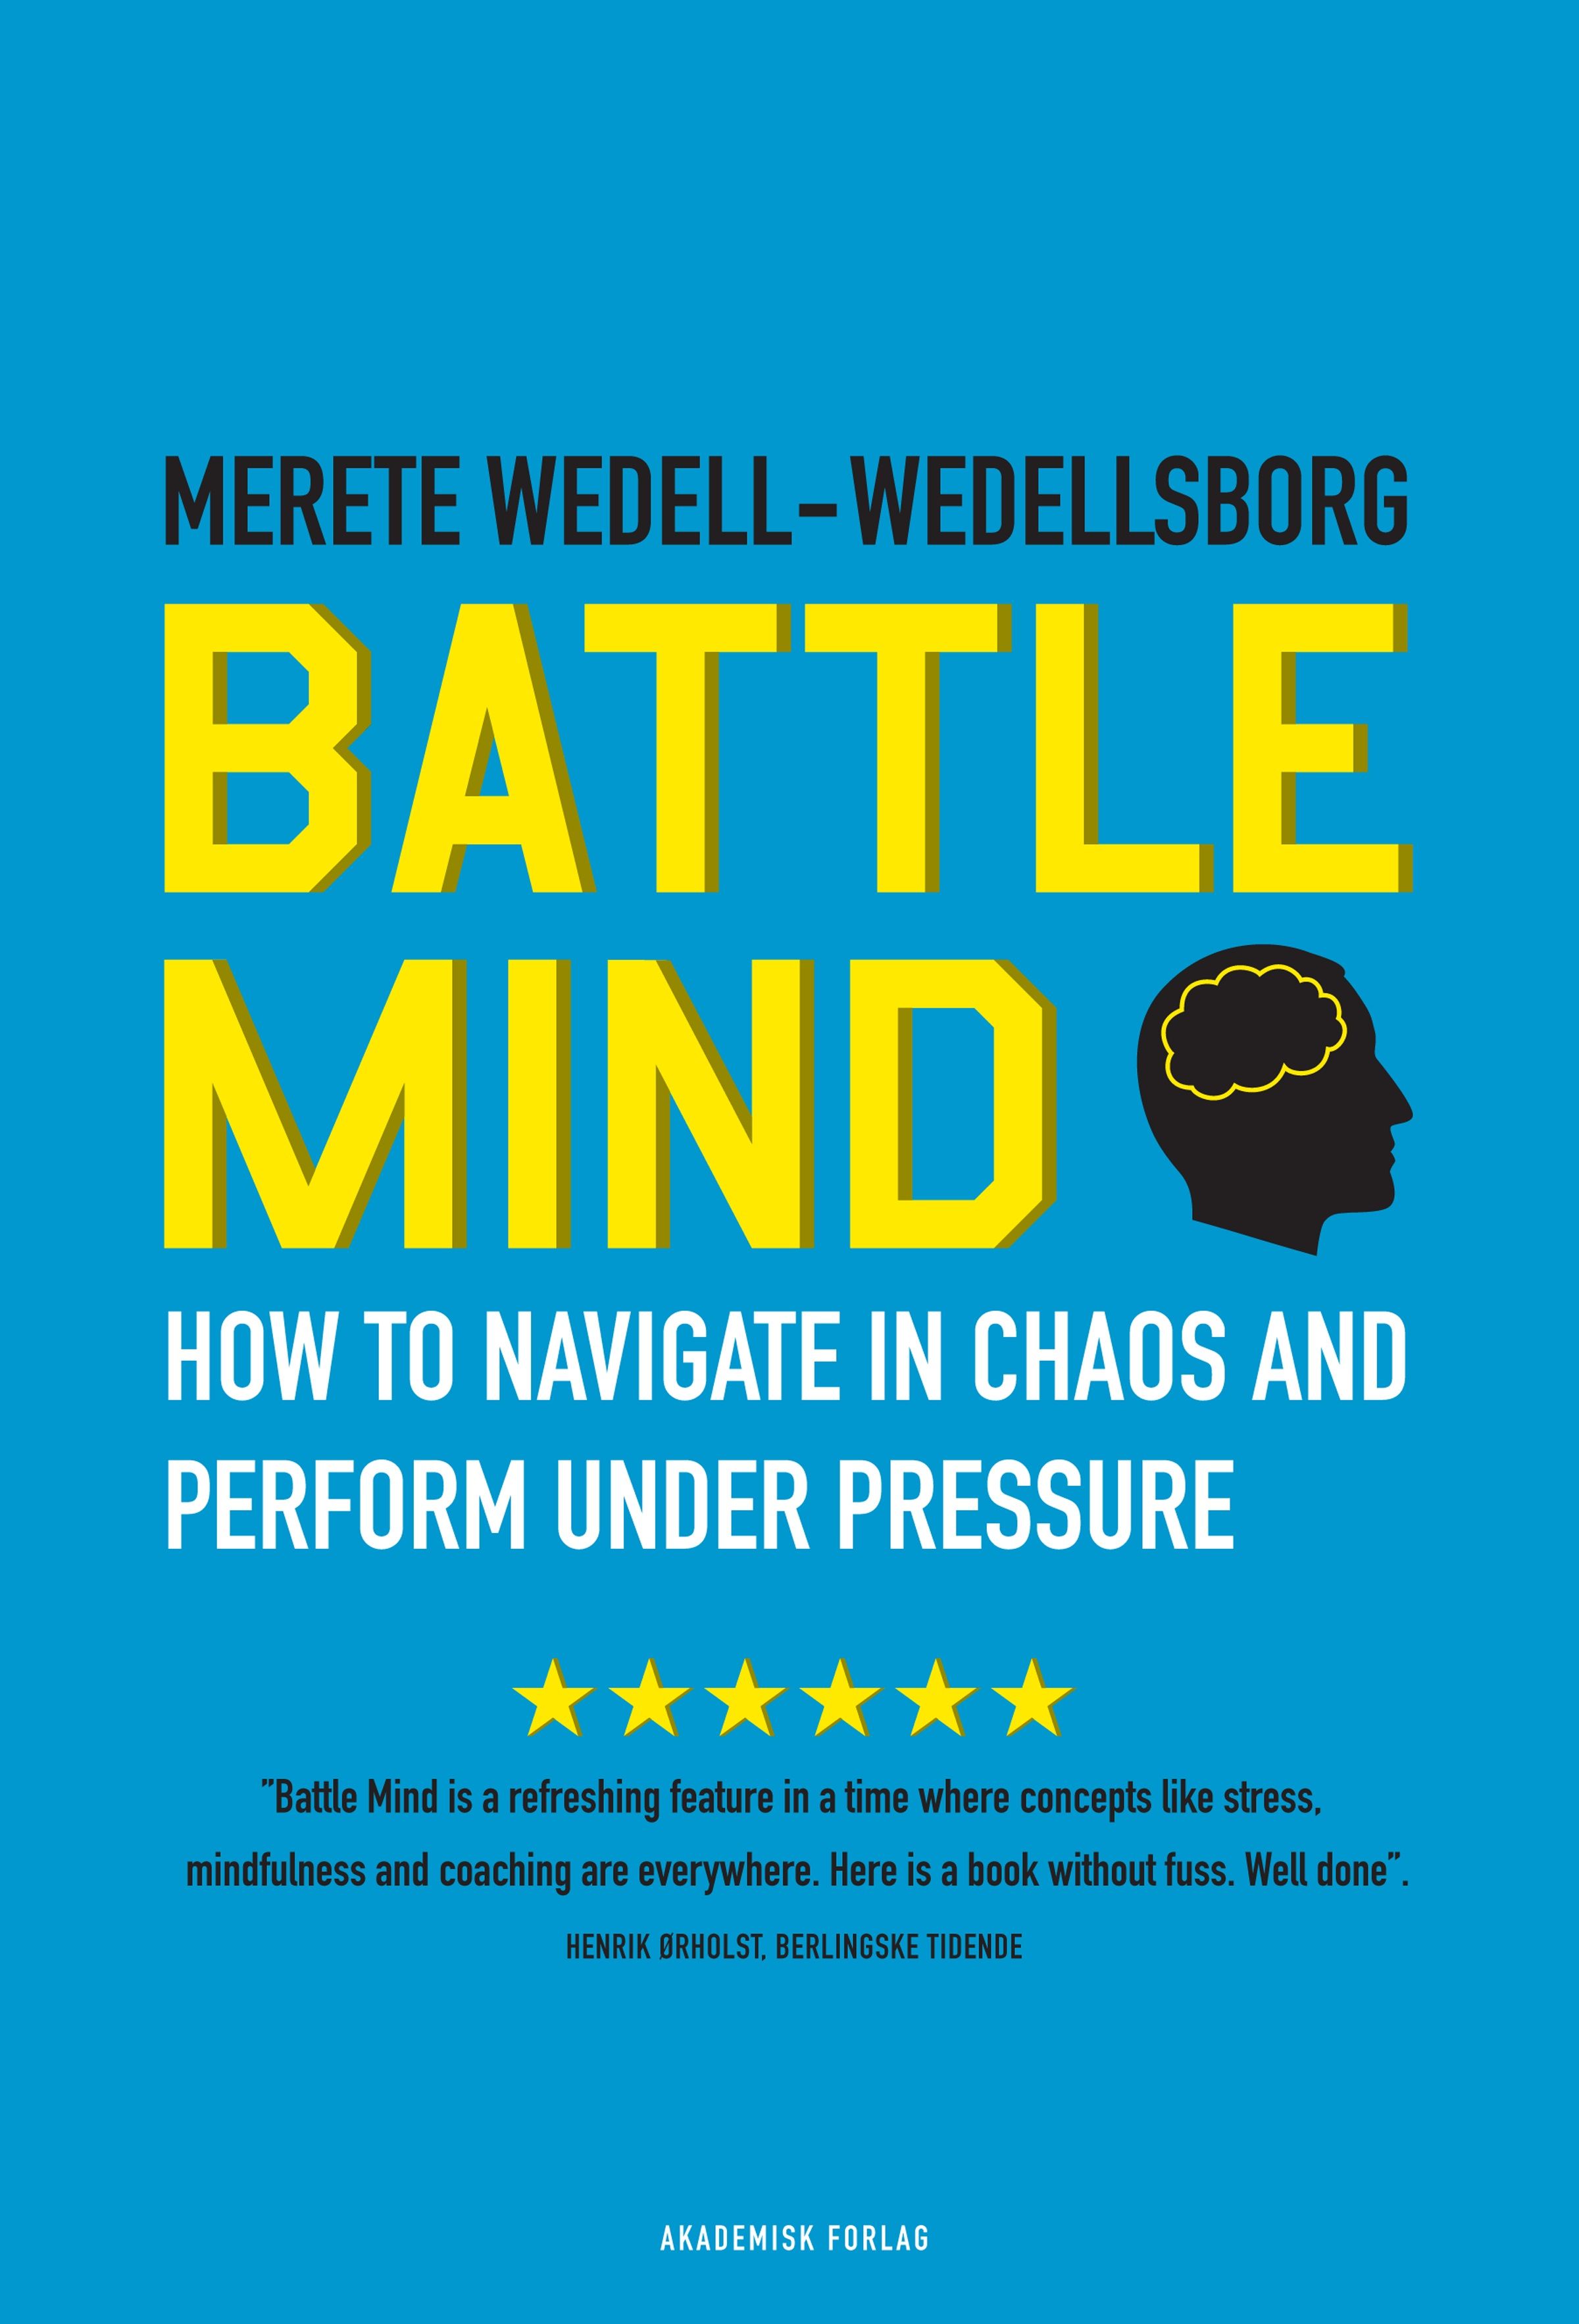 Battle Mind. How to Navigate in Chaos and Perform under Pressure, eBook by Merete Wedell-Wedellsborg